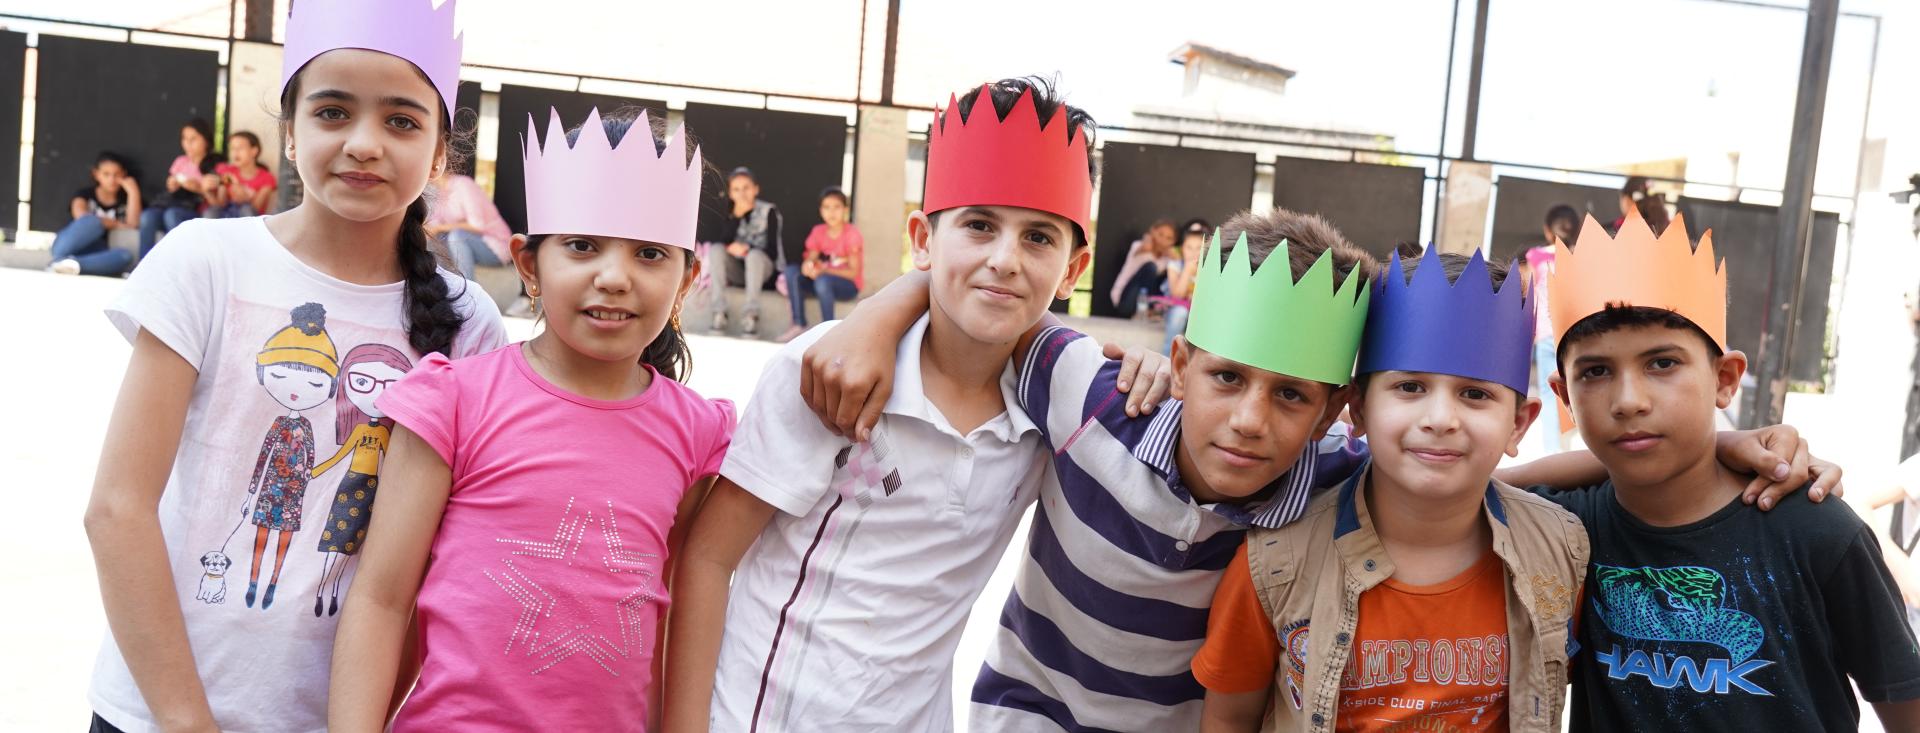 A group of 7 children wearing multi-colored paper crowns stand with their arms around each other's shoulders looking into the camera